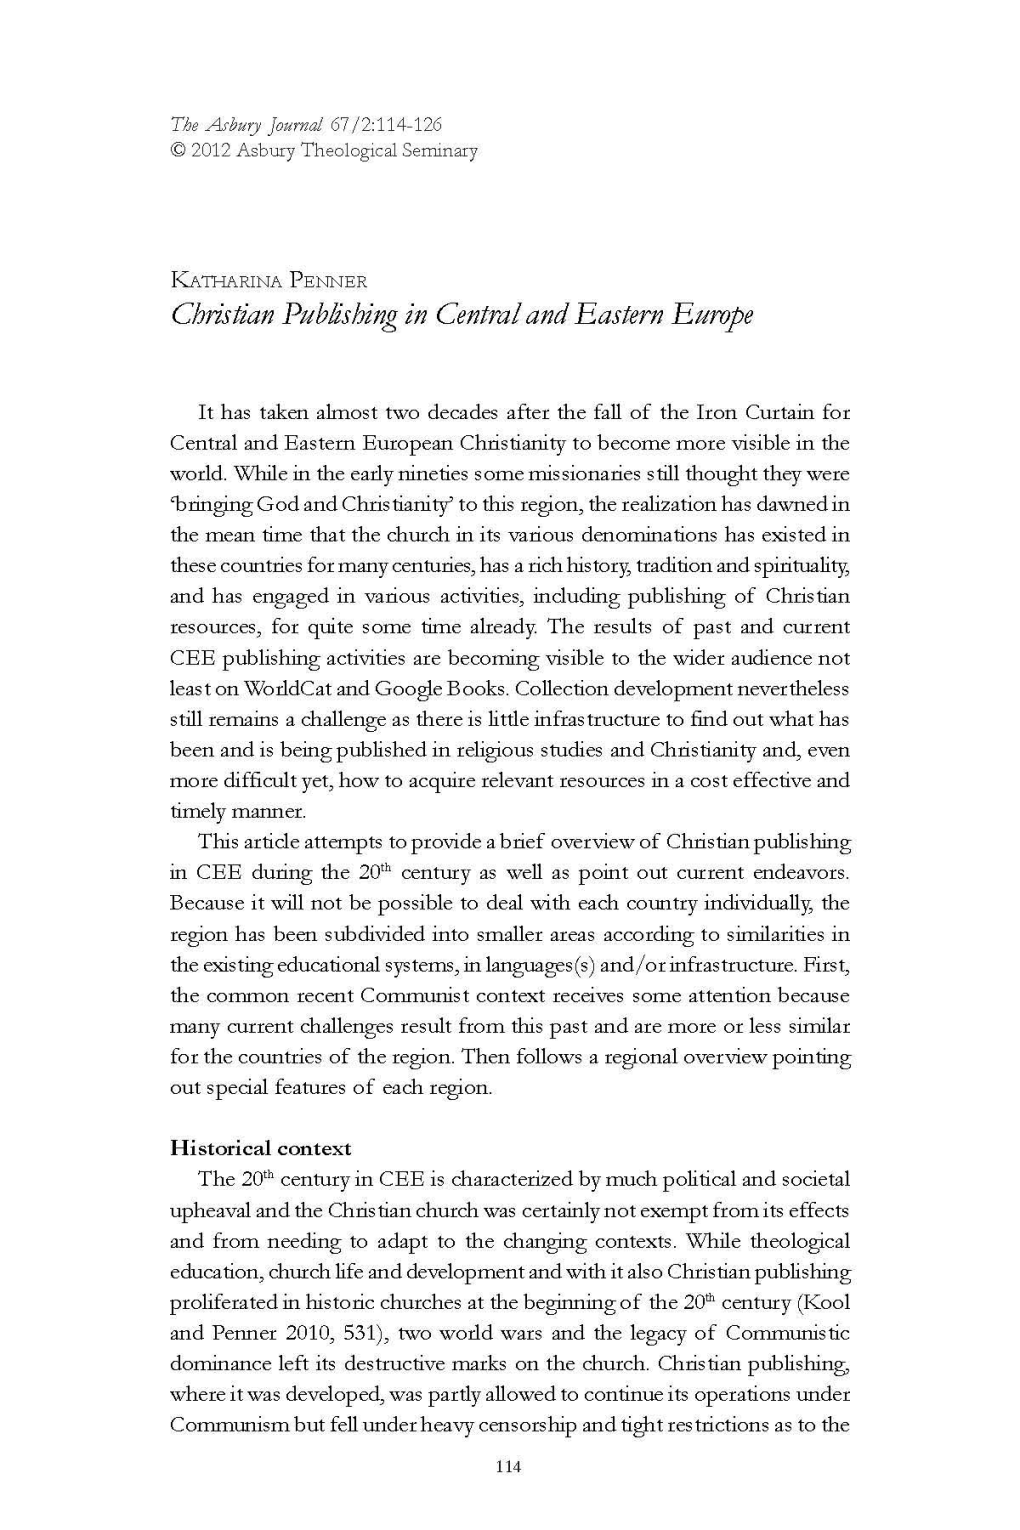 Christian Publishing in Central and Eastern Europe